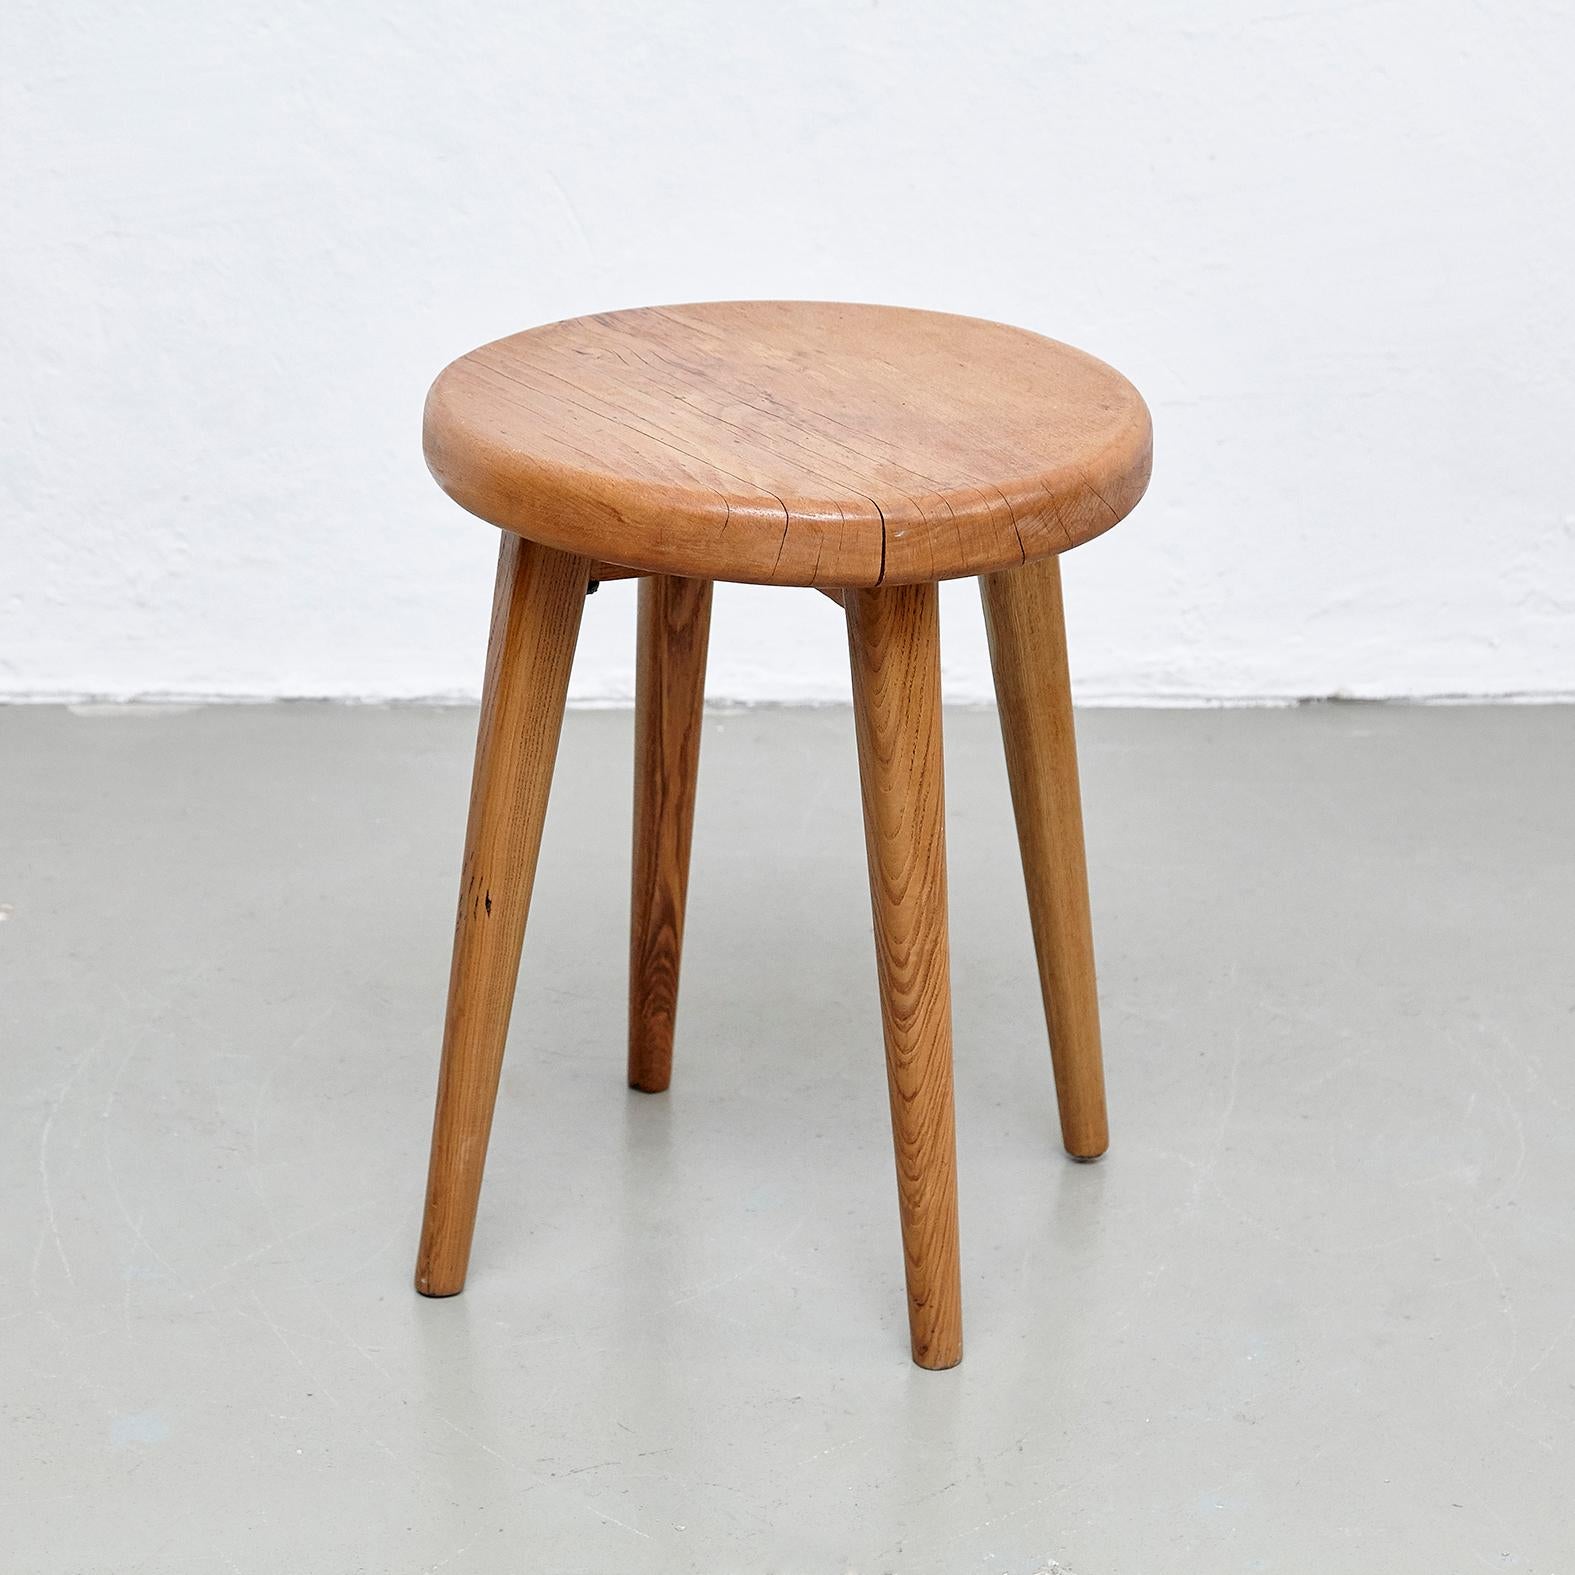 Mid-20th Century After Pierre Jeanneret, Mid-Century Modern, Wood French Side Table, circa 1960